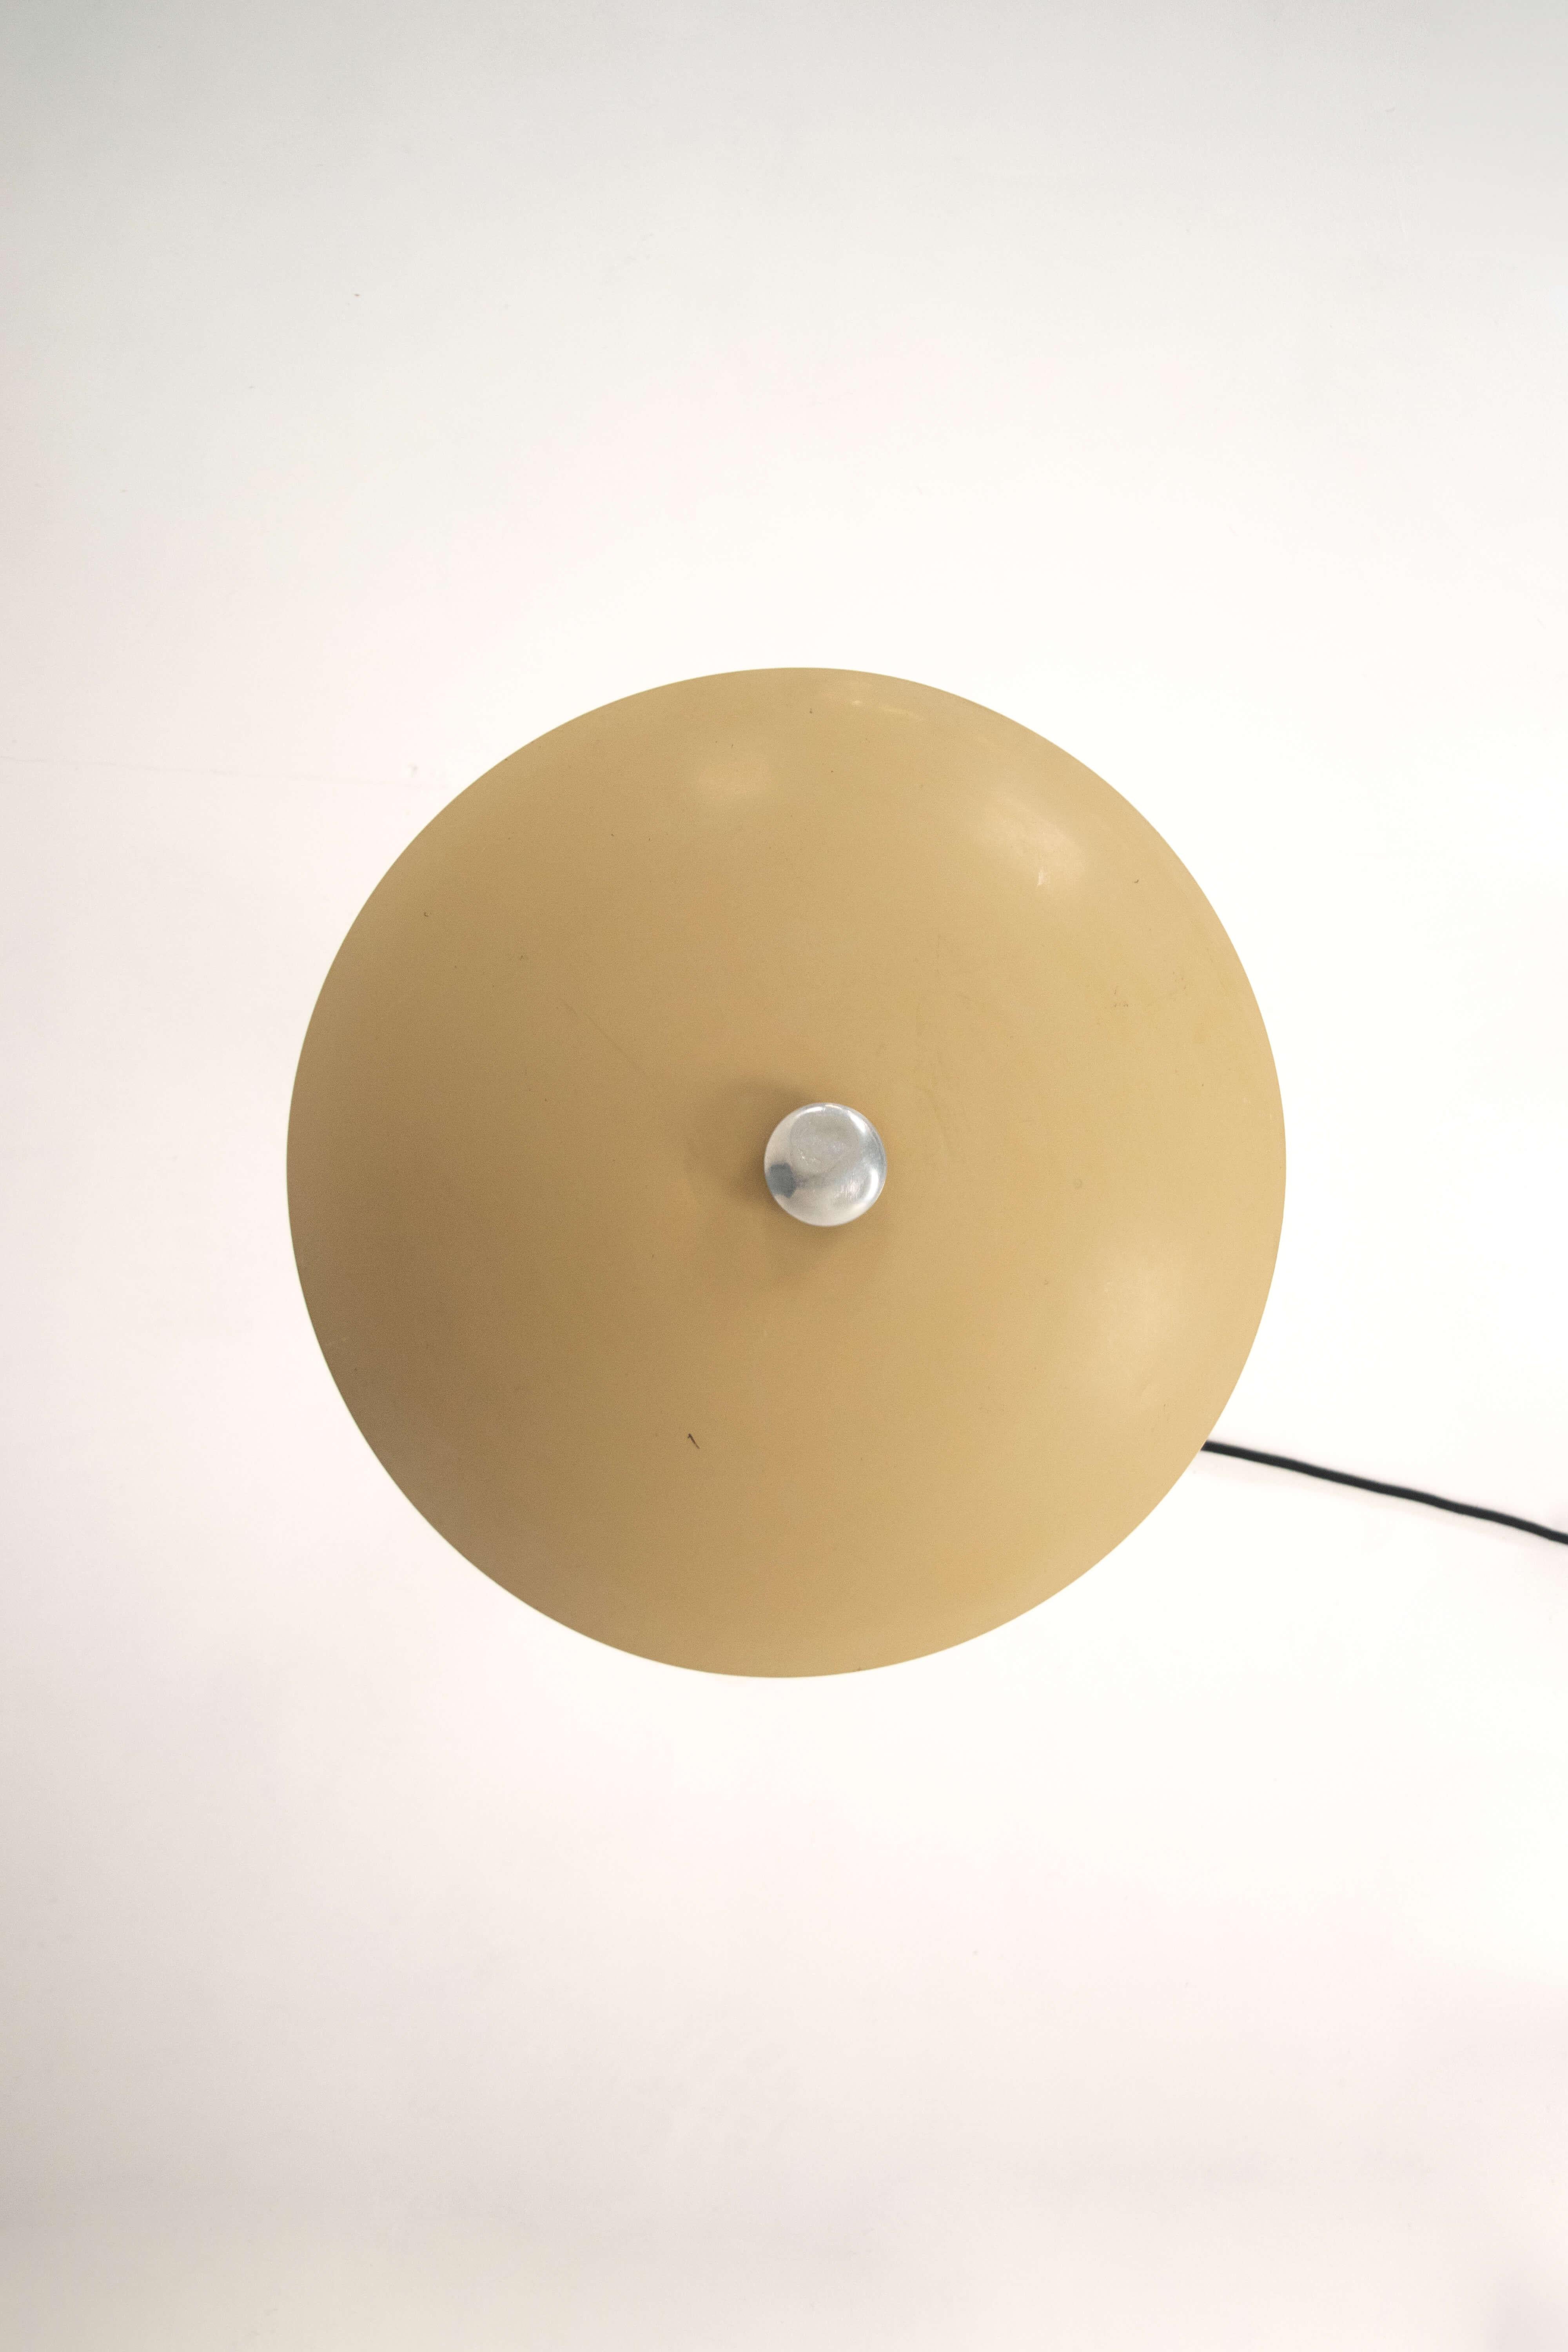 Bauhaus Schröder 2000 Table Lamp by Max Schumacher, Germany, 1930s For Sale